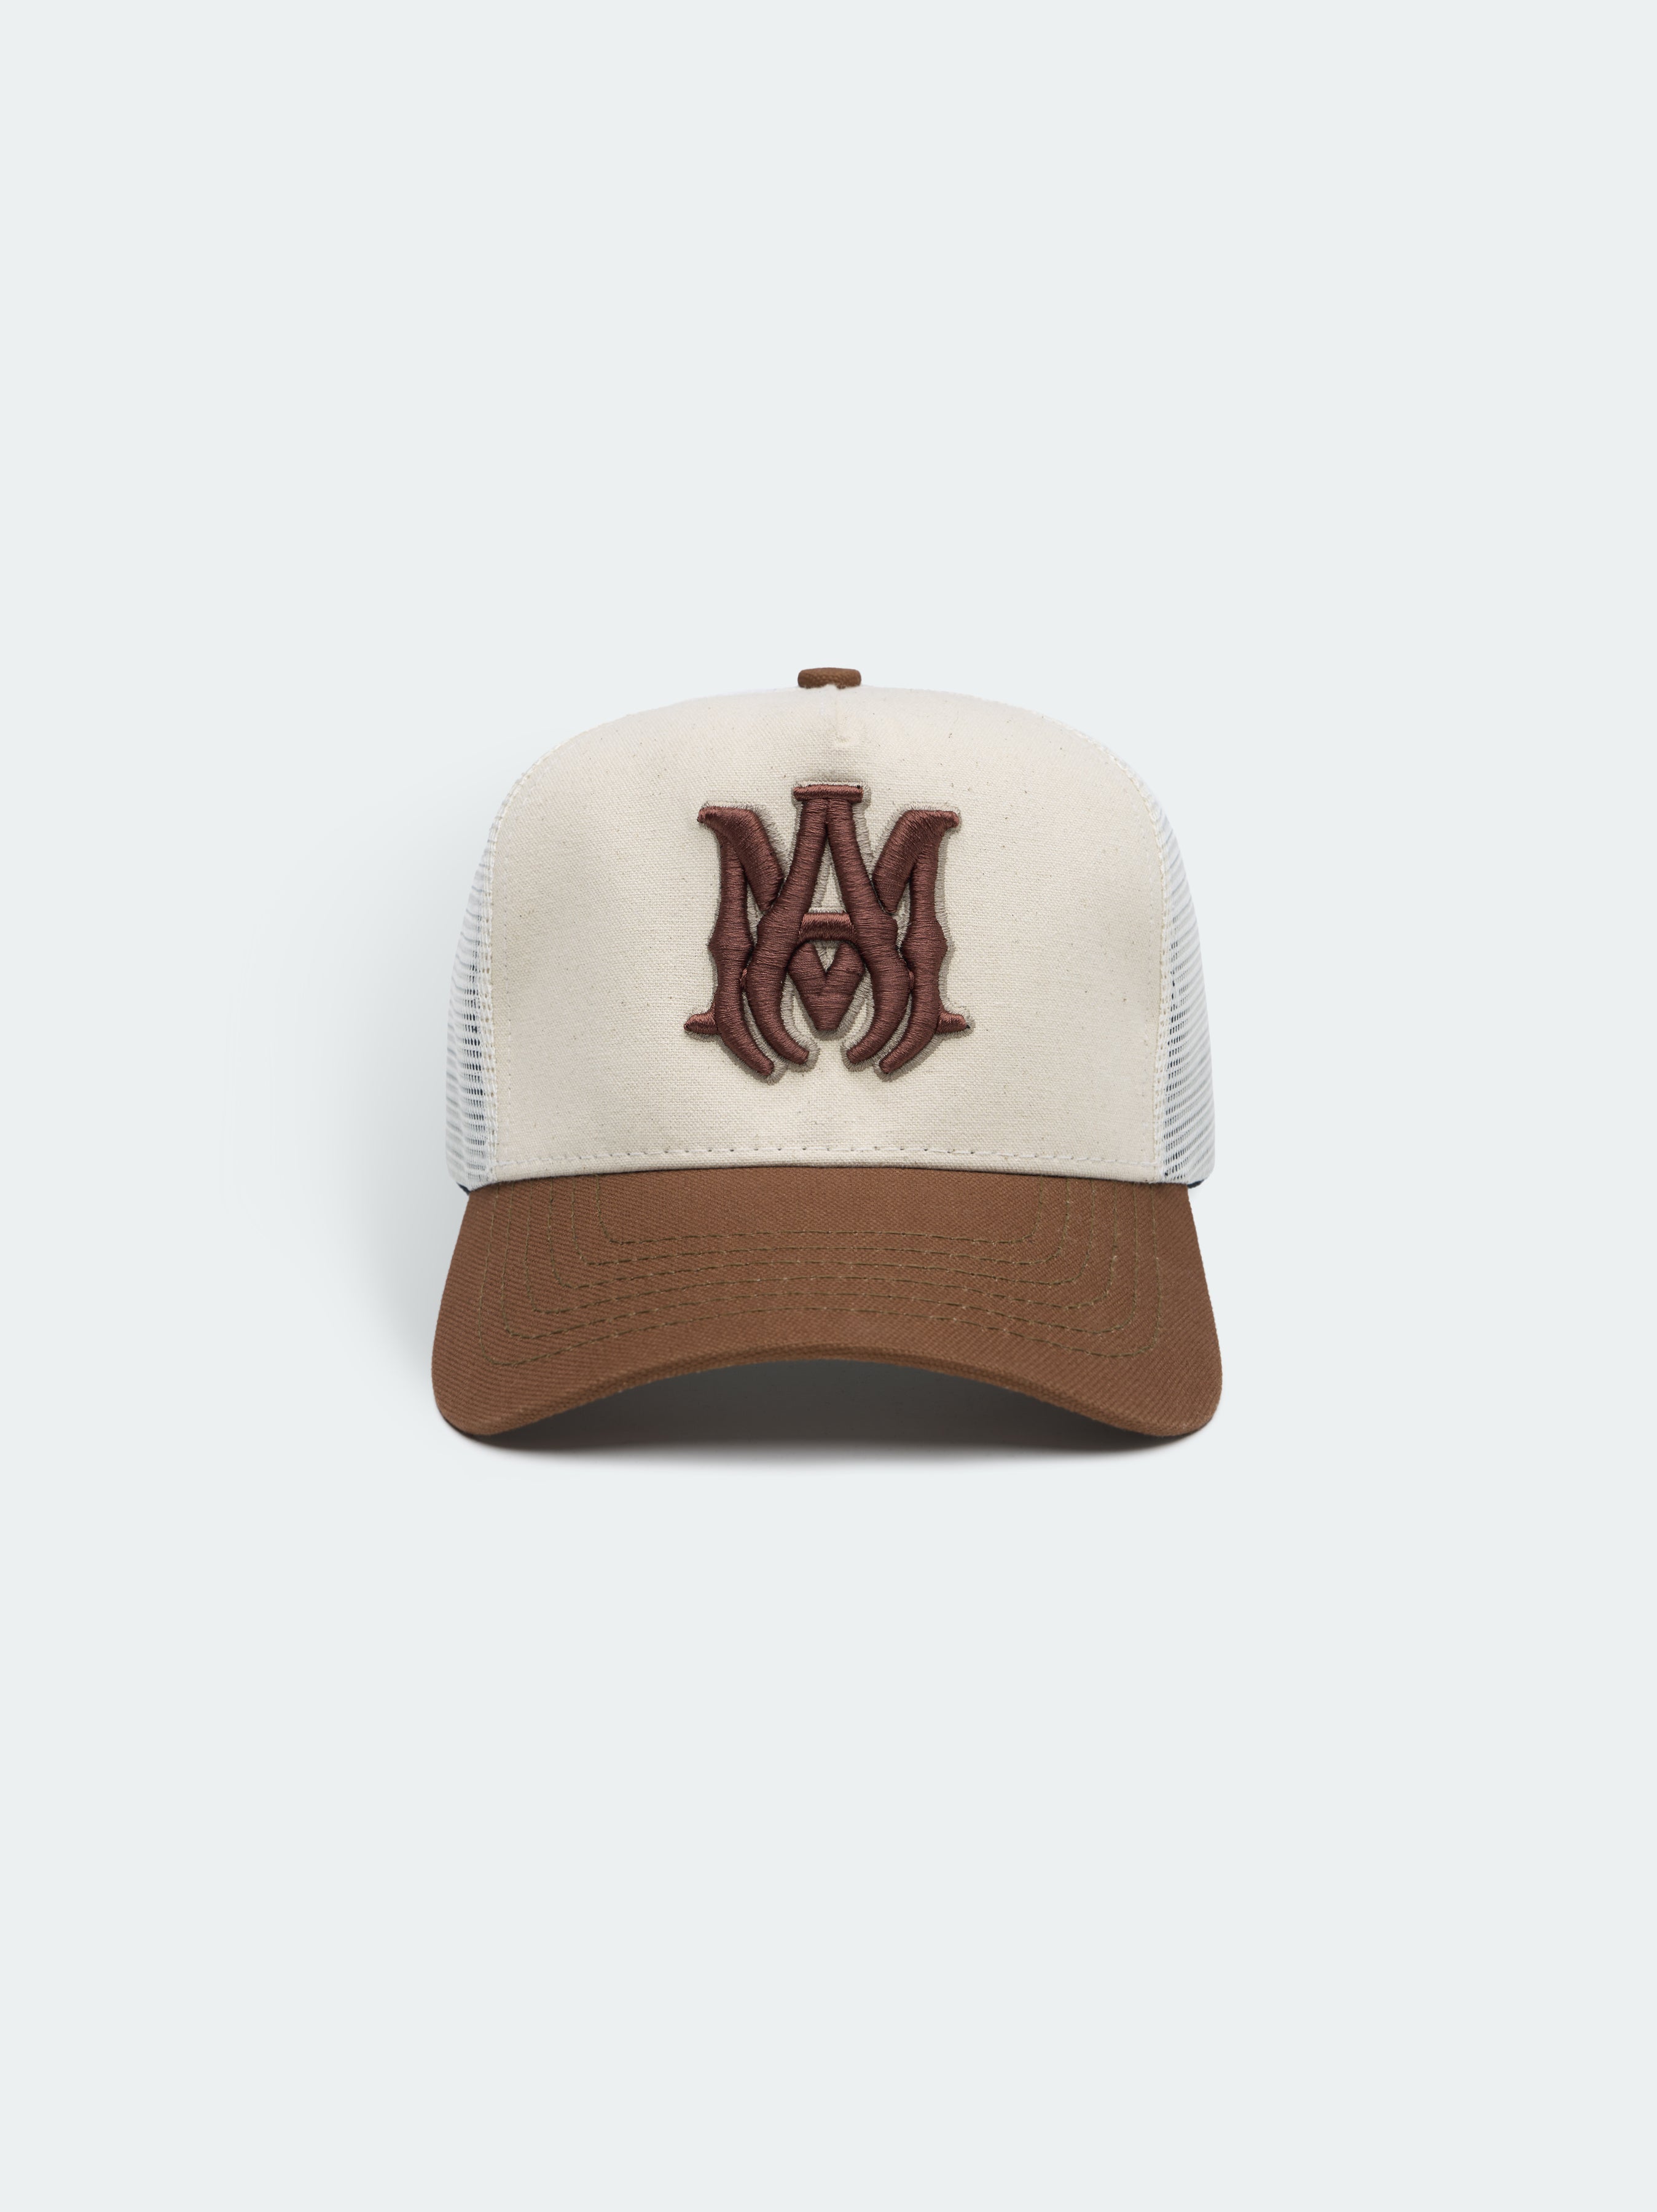 Product TWO TONE MA TRUCKER HAT - Natural Cinnamon featured image